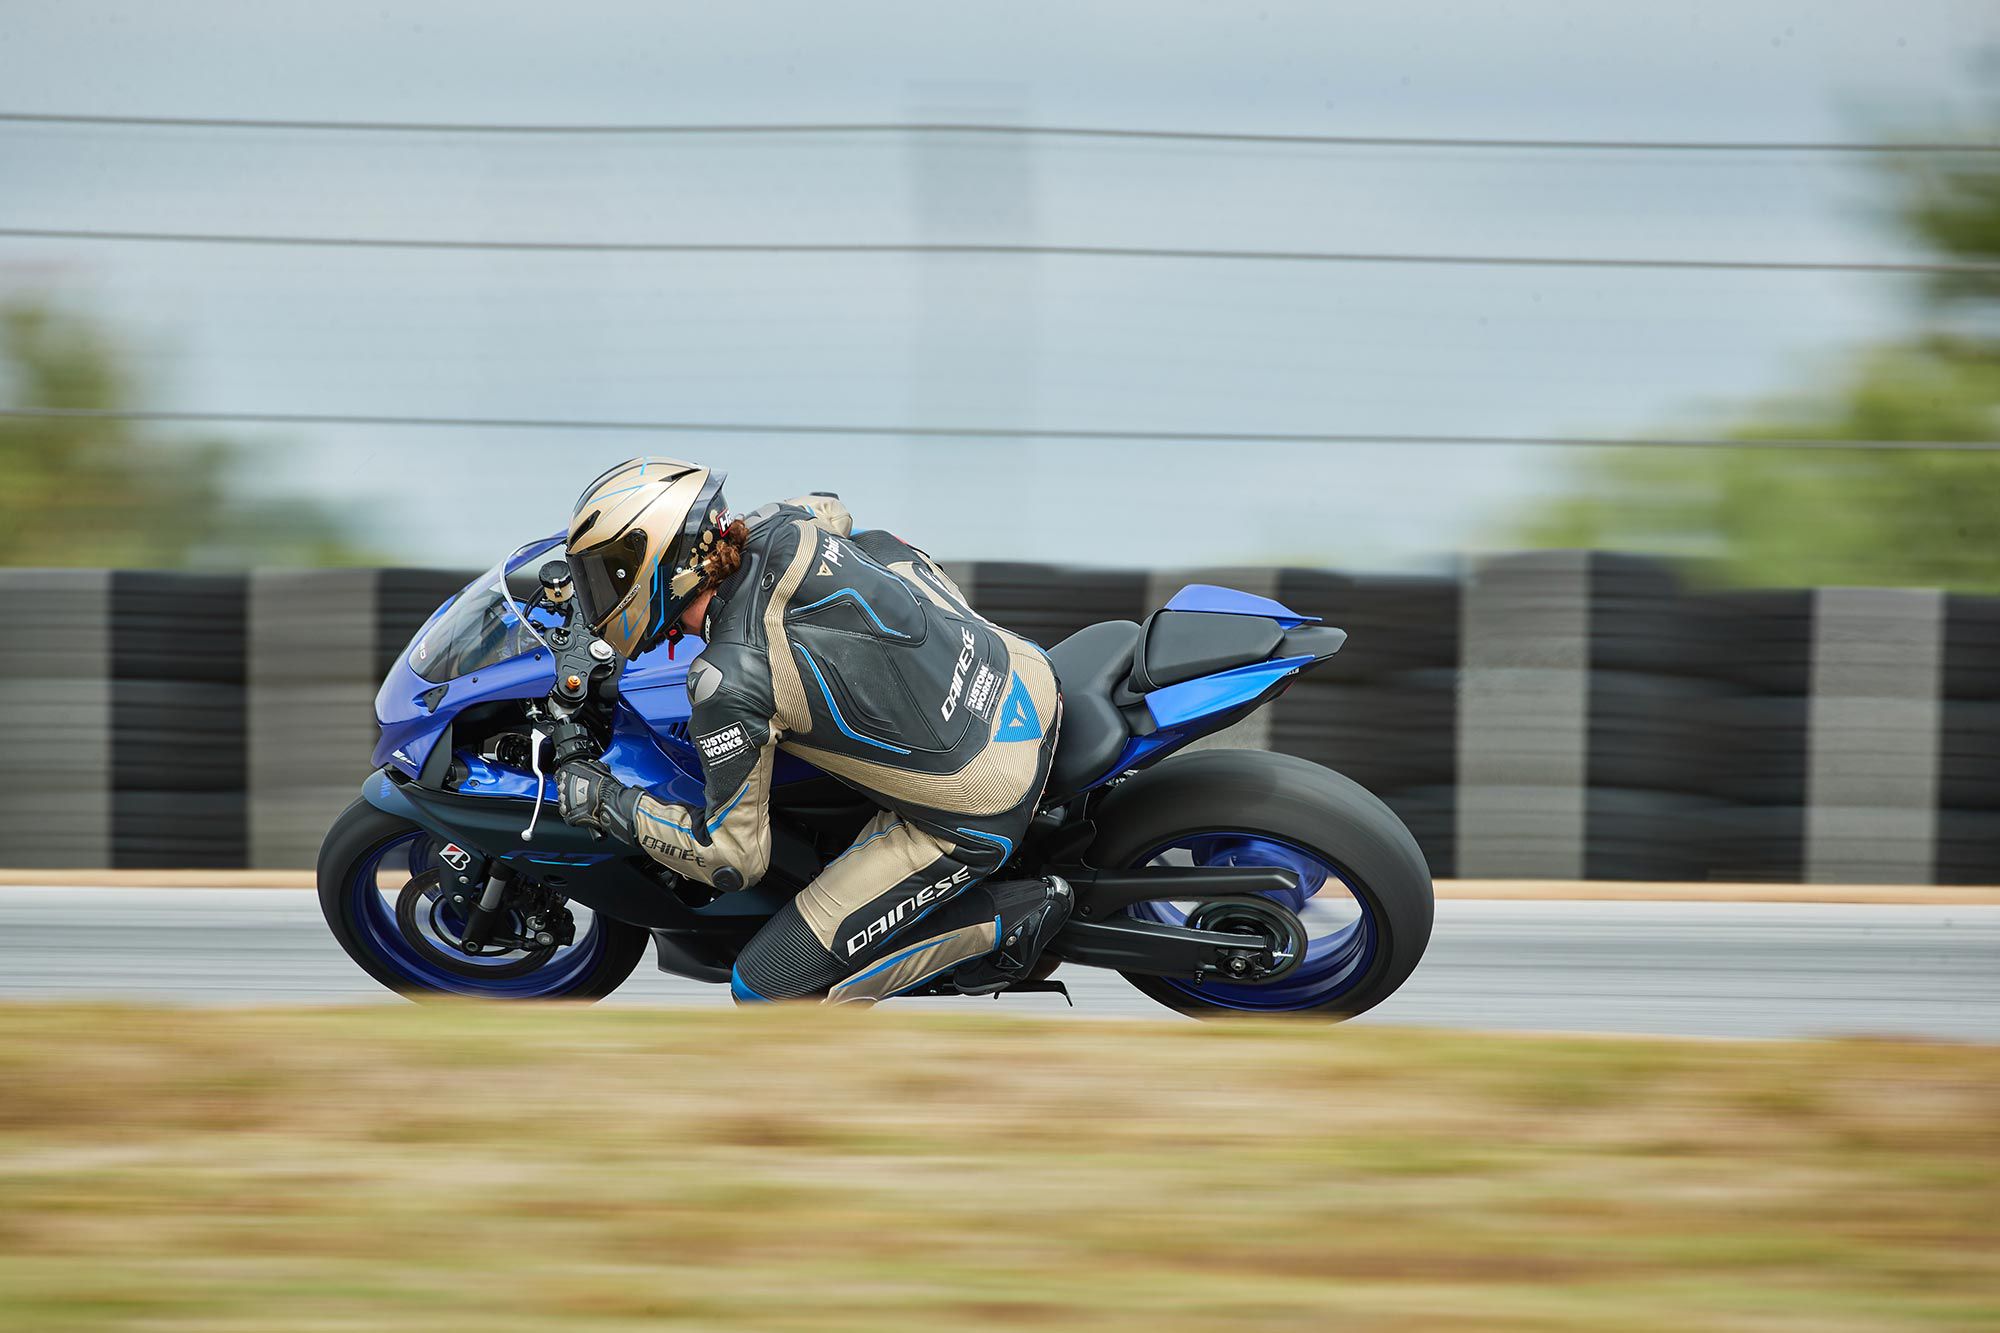 The Tuning Fork brand appeals to a wider spectrum of street riders with its more affordable YZF-R7 sportbike ($8,999).